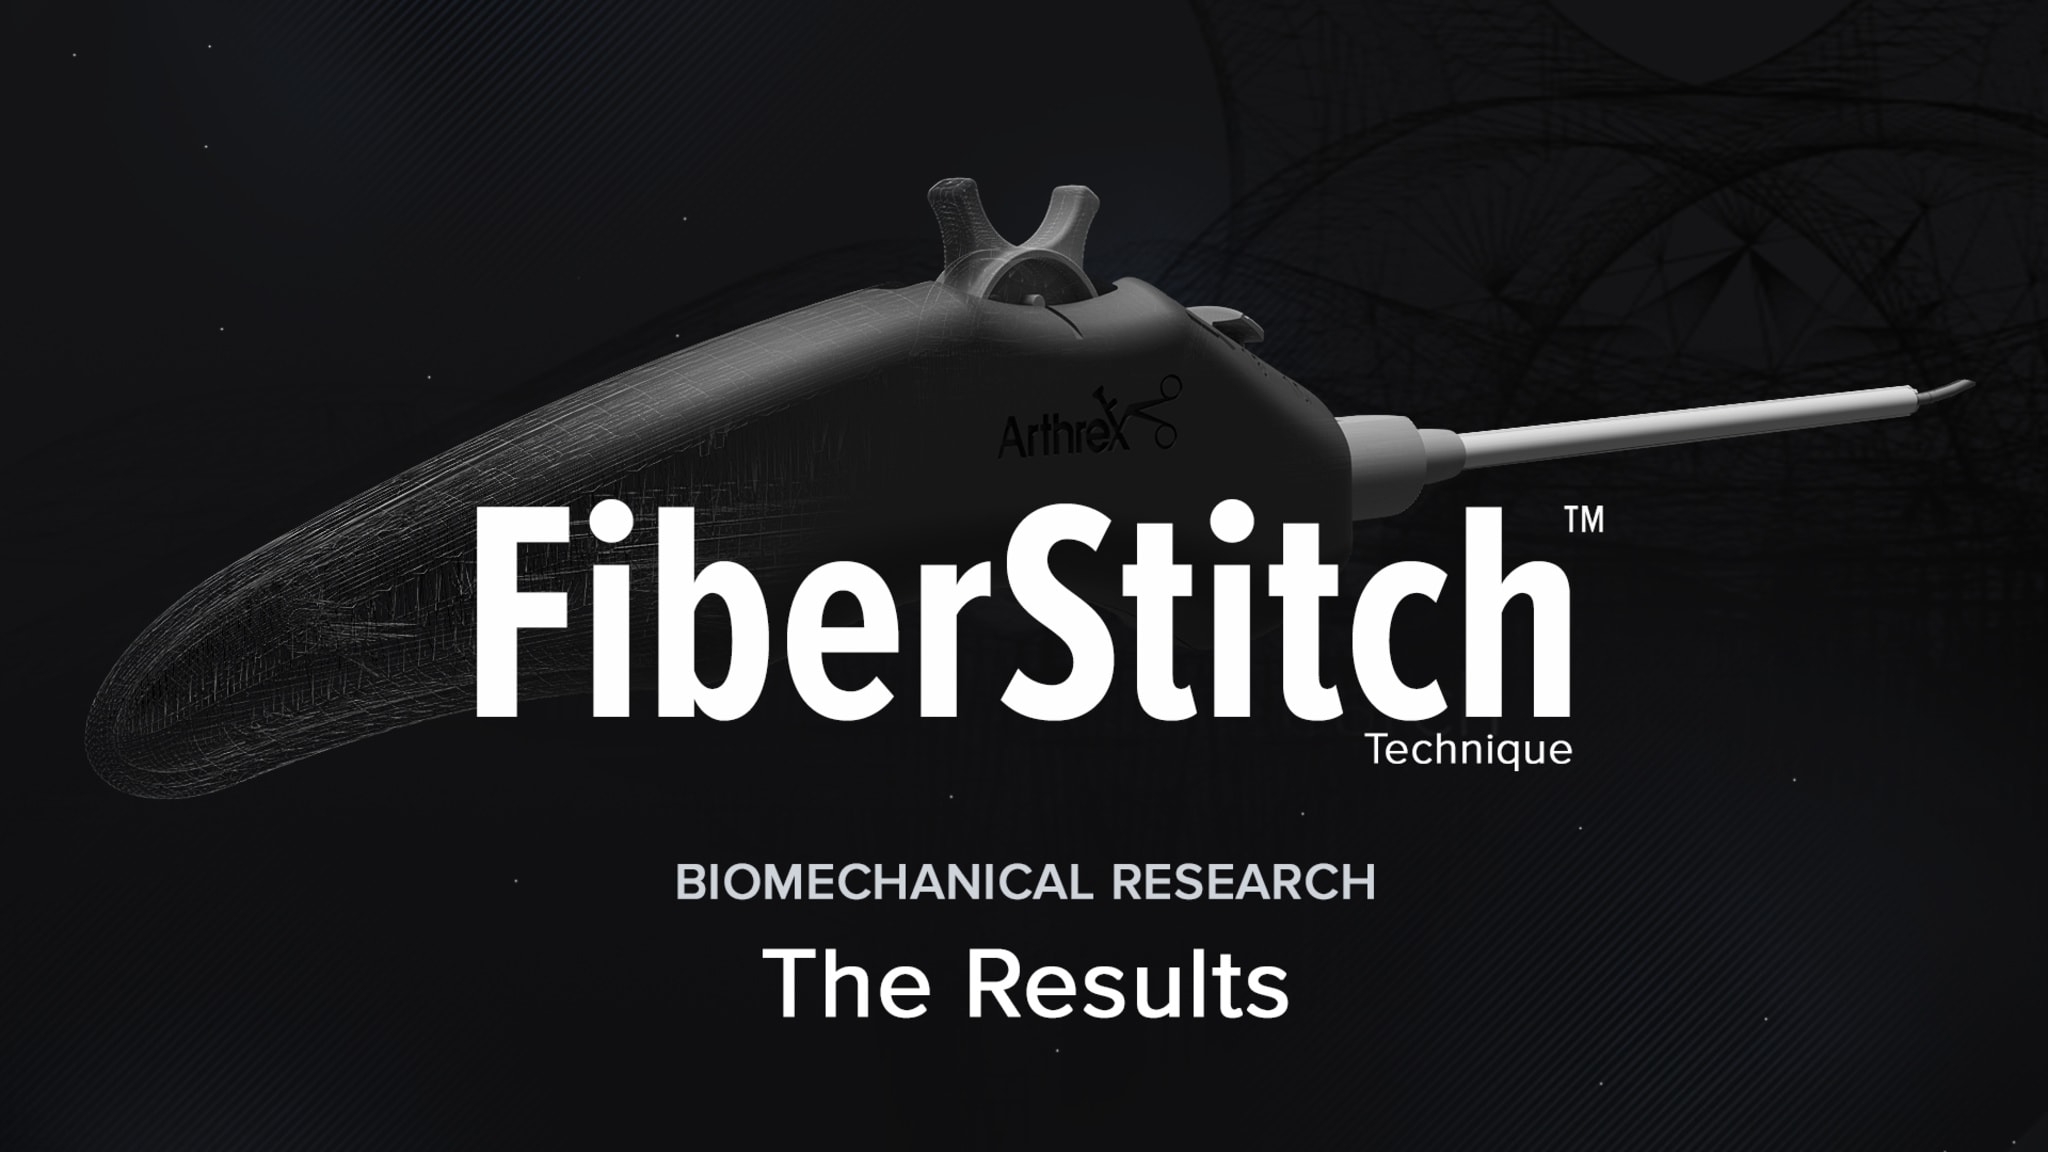 FiberStitch™ Implant Biomechanical Research: The Results